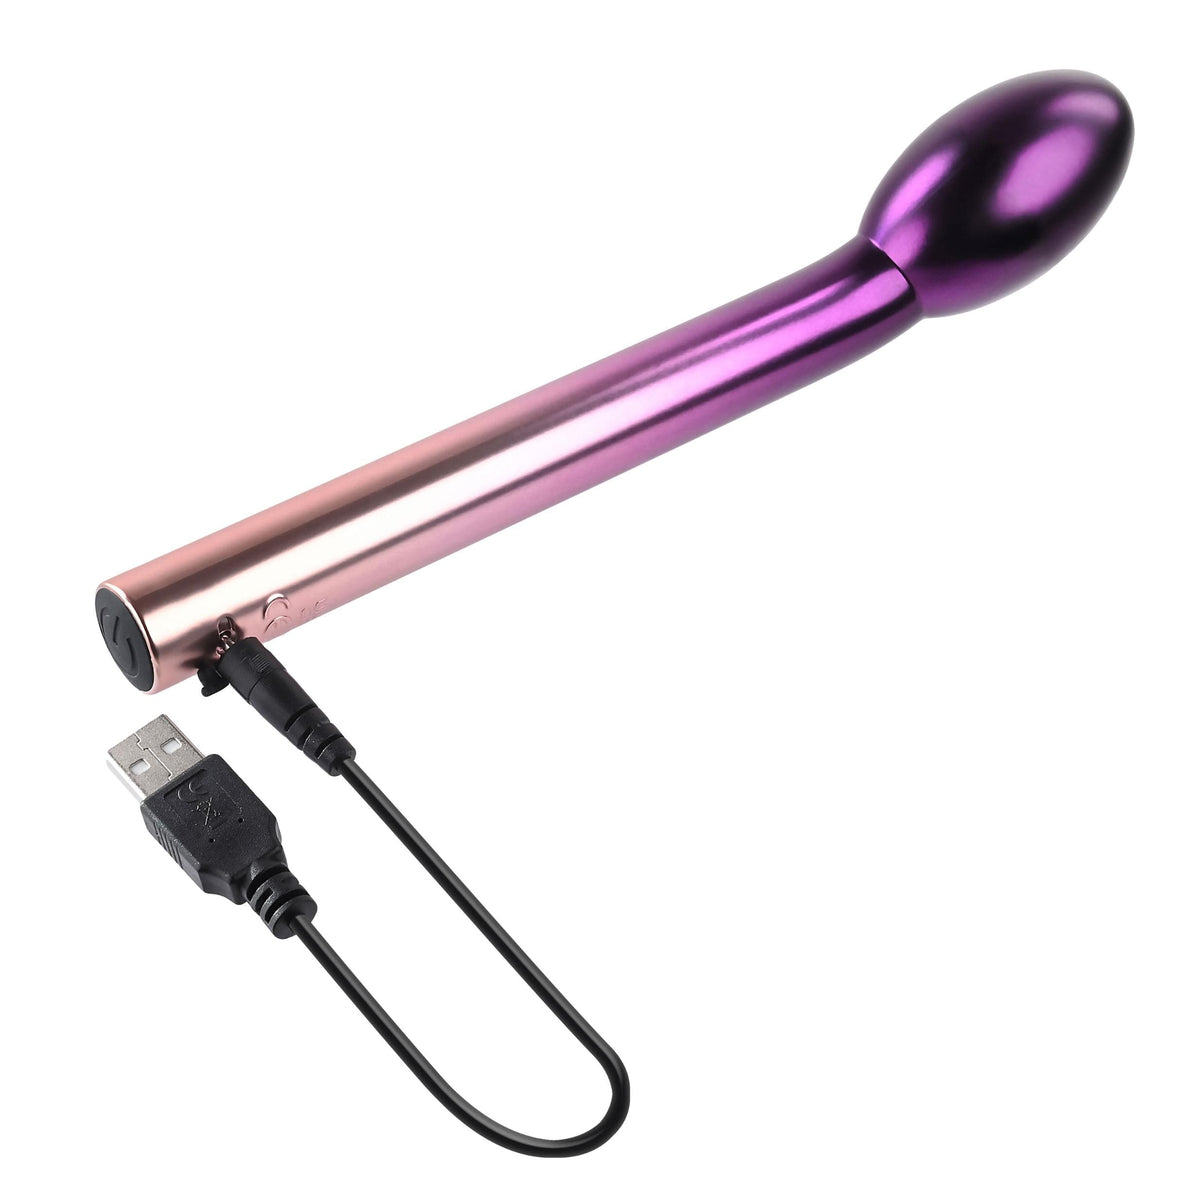 afternoon delight g spot vibrator ombre